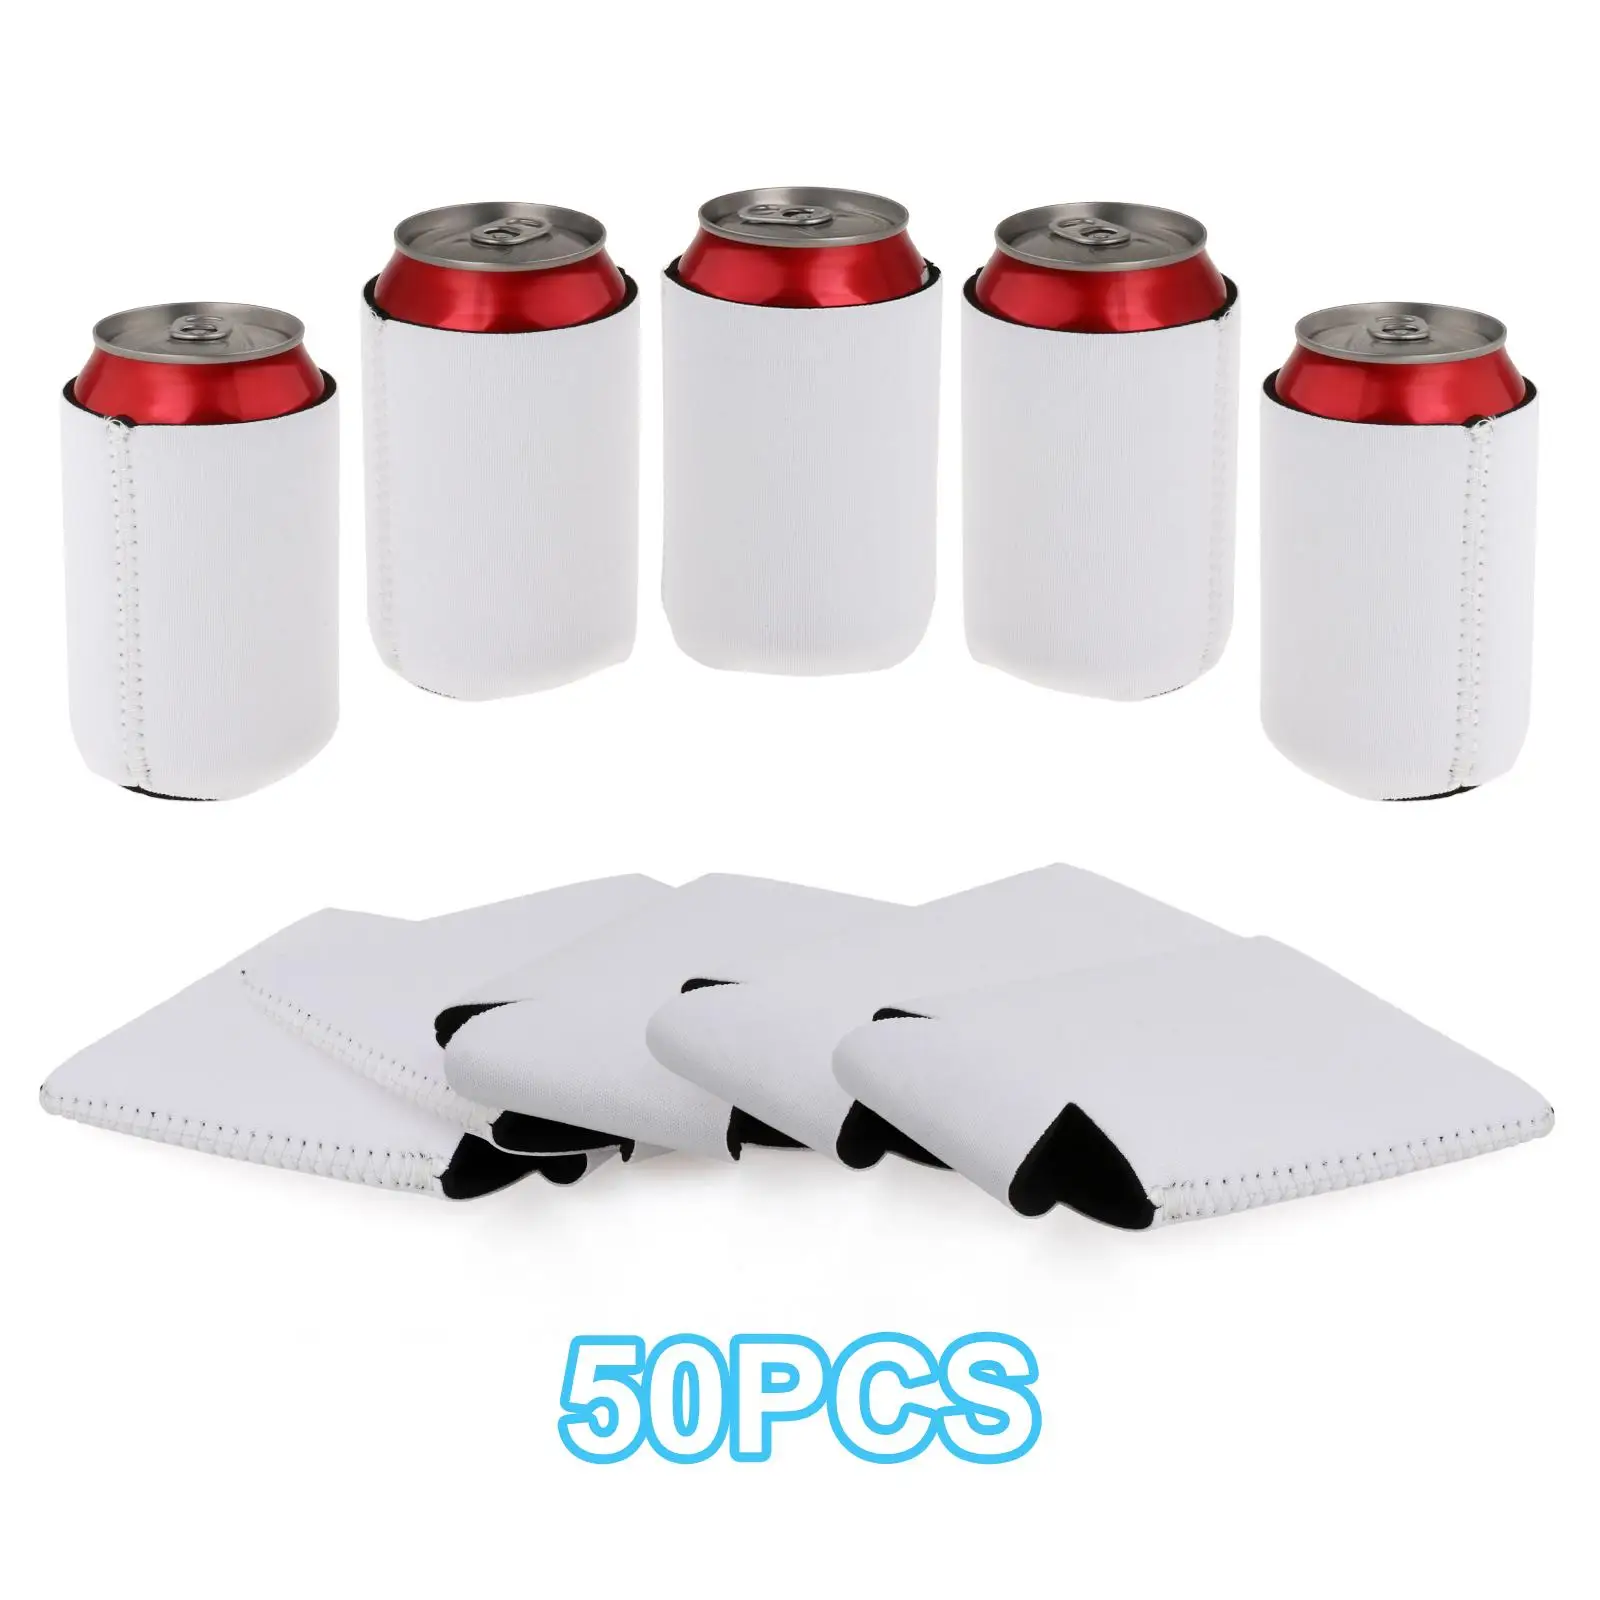 50Pcs Blank Can Coolers Sleeves Collapsible Cover Coolies for Events Wedding Favors Gifts HTV Projects Cans Bottles Party Favors